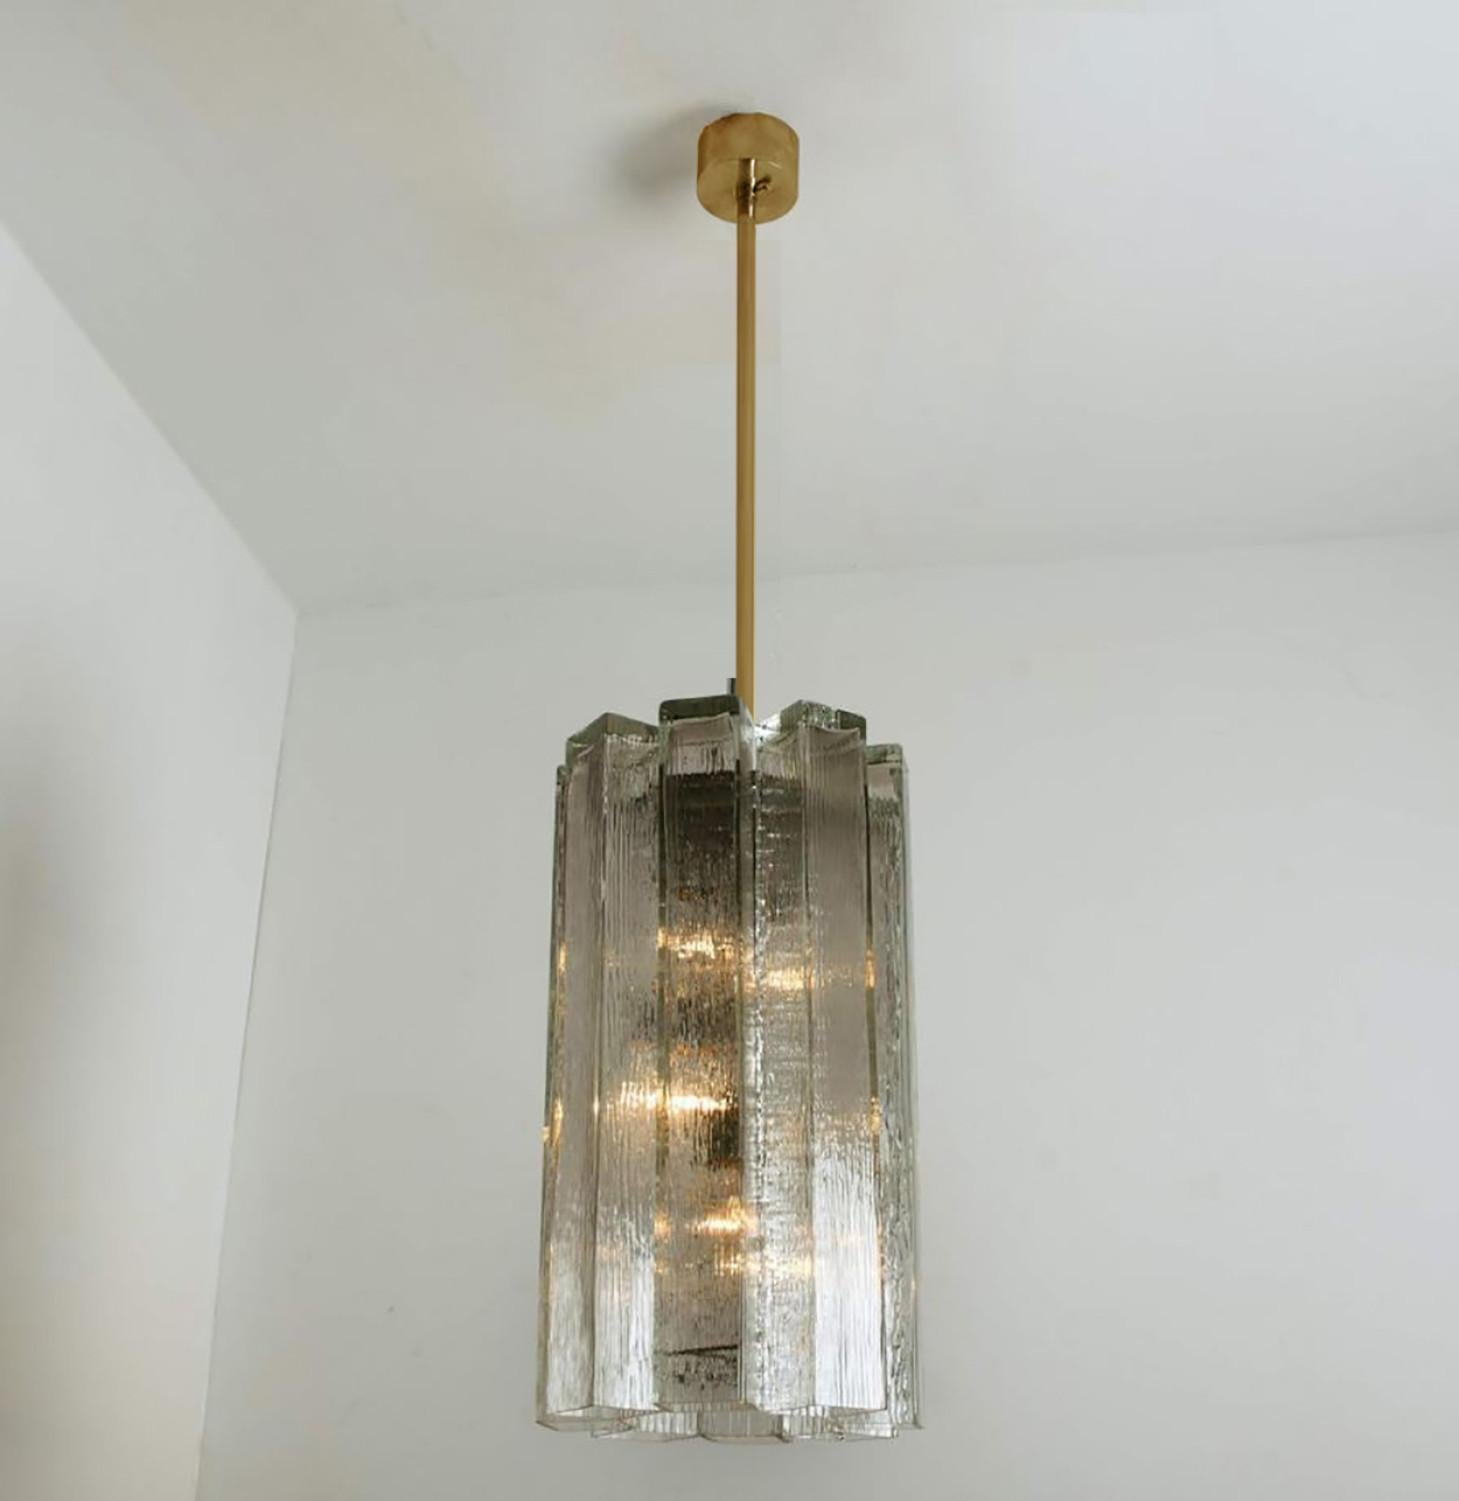 Other 1 of the 4 Hand Blown Murano Pendant Lights, Model 4308, by Doria, 1970